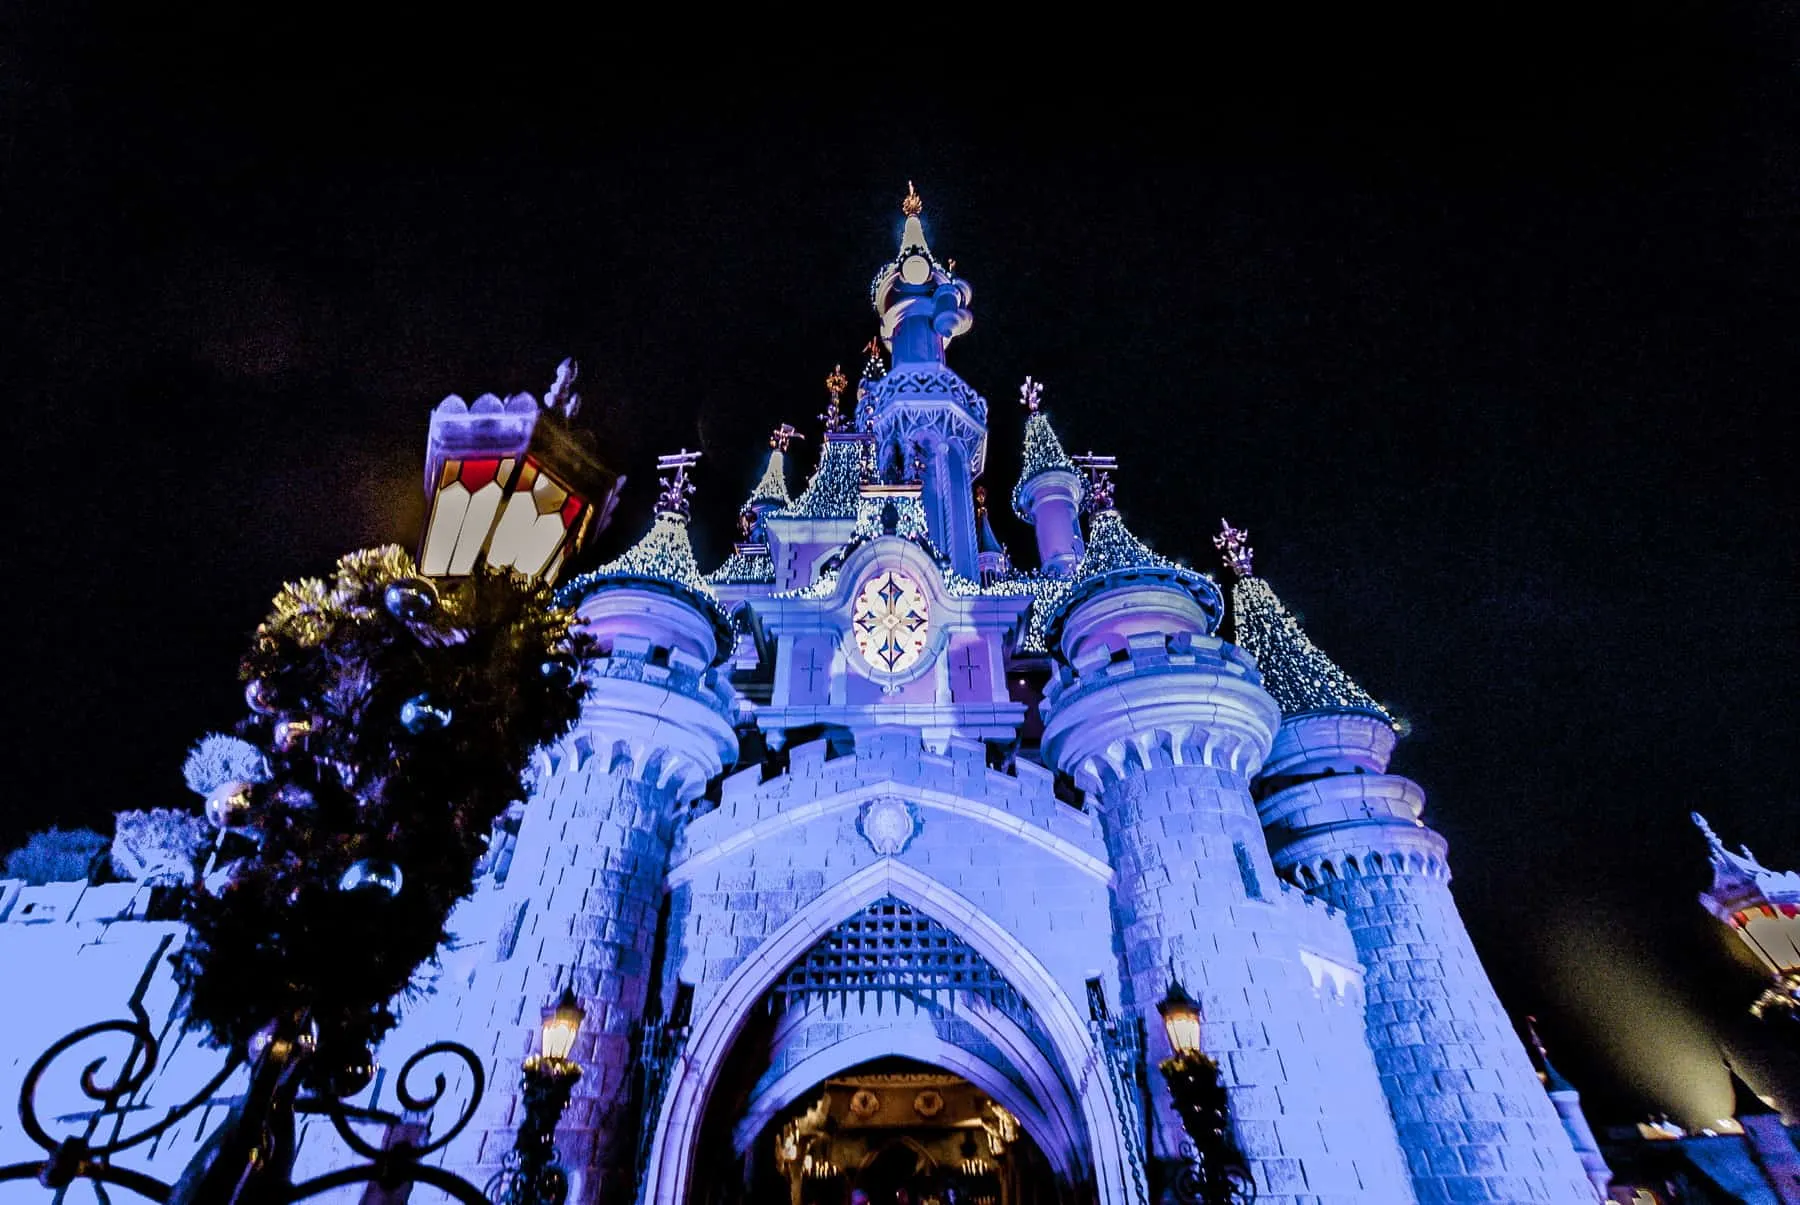 Tips for visiting Disneyland Paris - The Ultimate how to guide